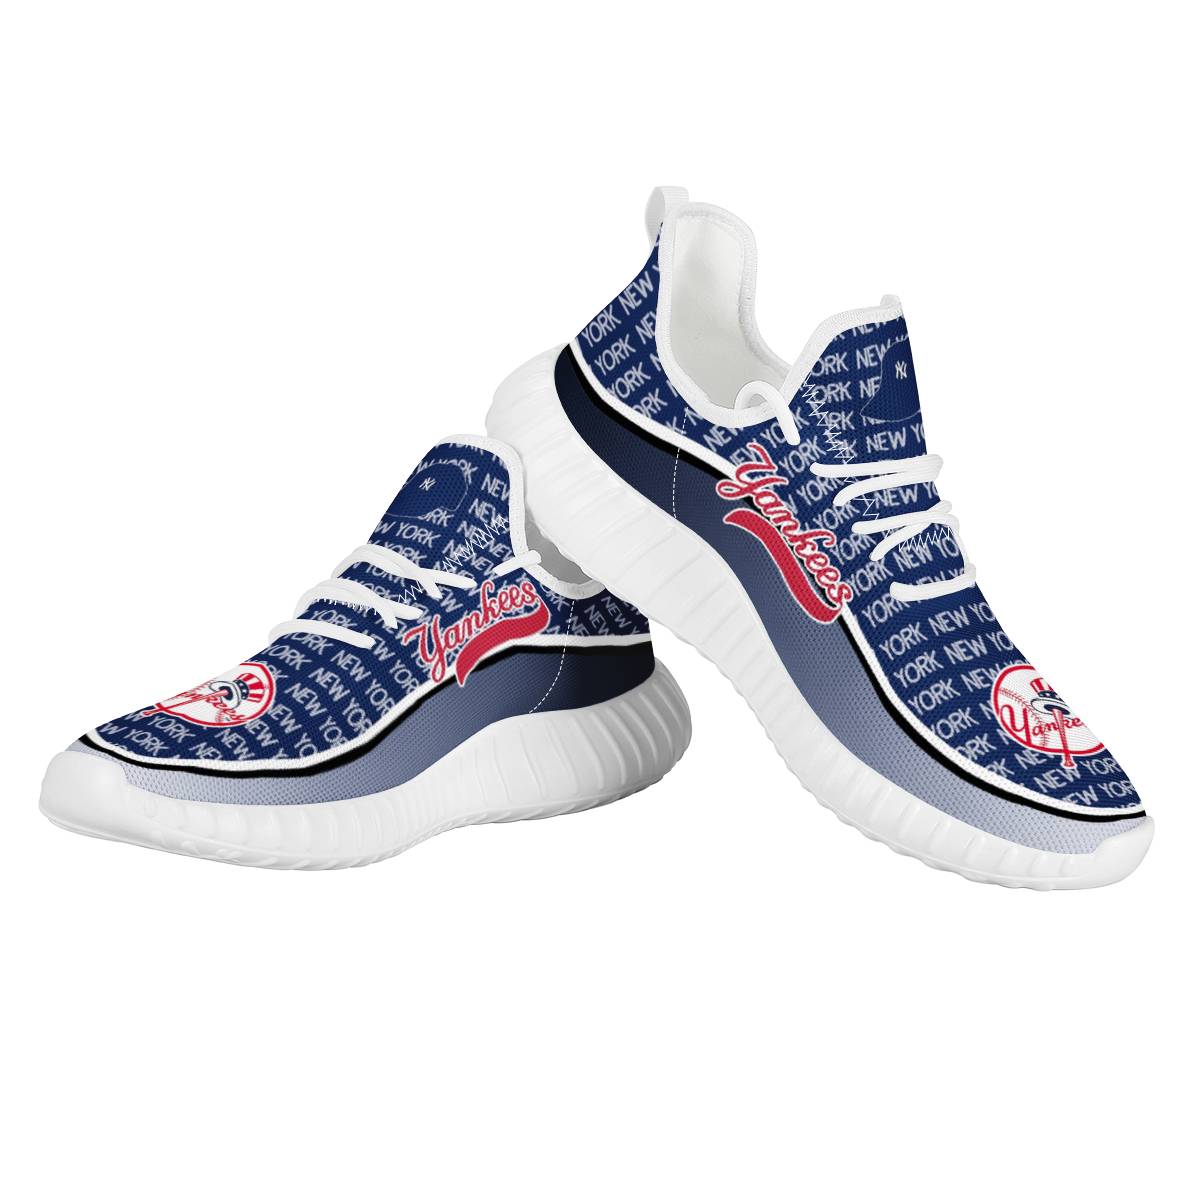 Women's New York Yankees Mesh Knit Sneakers/Shoes 010